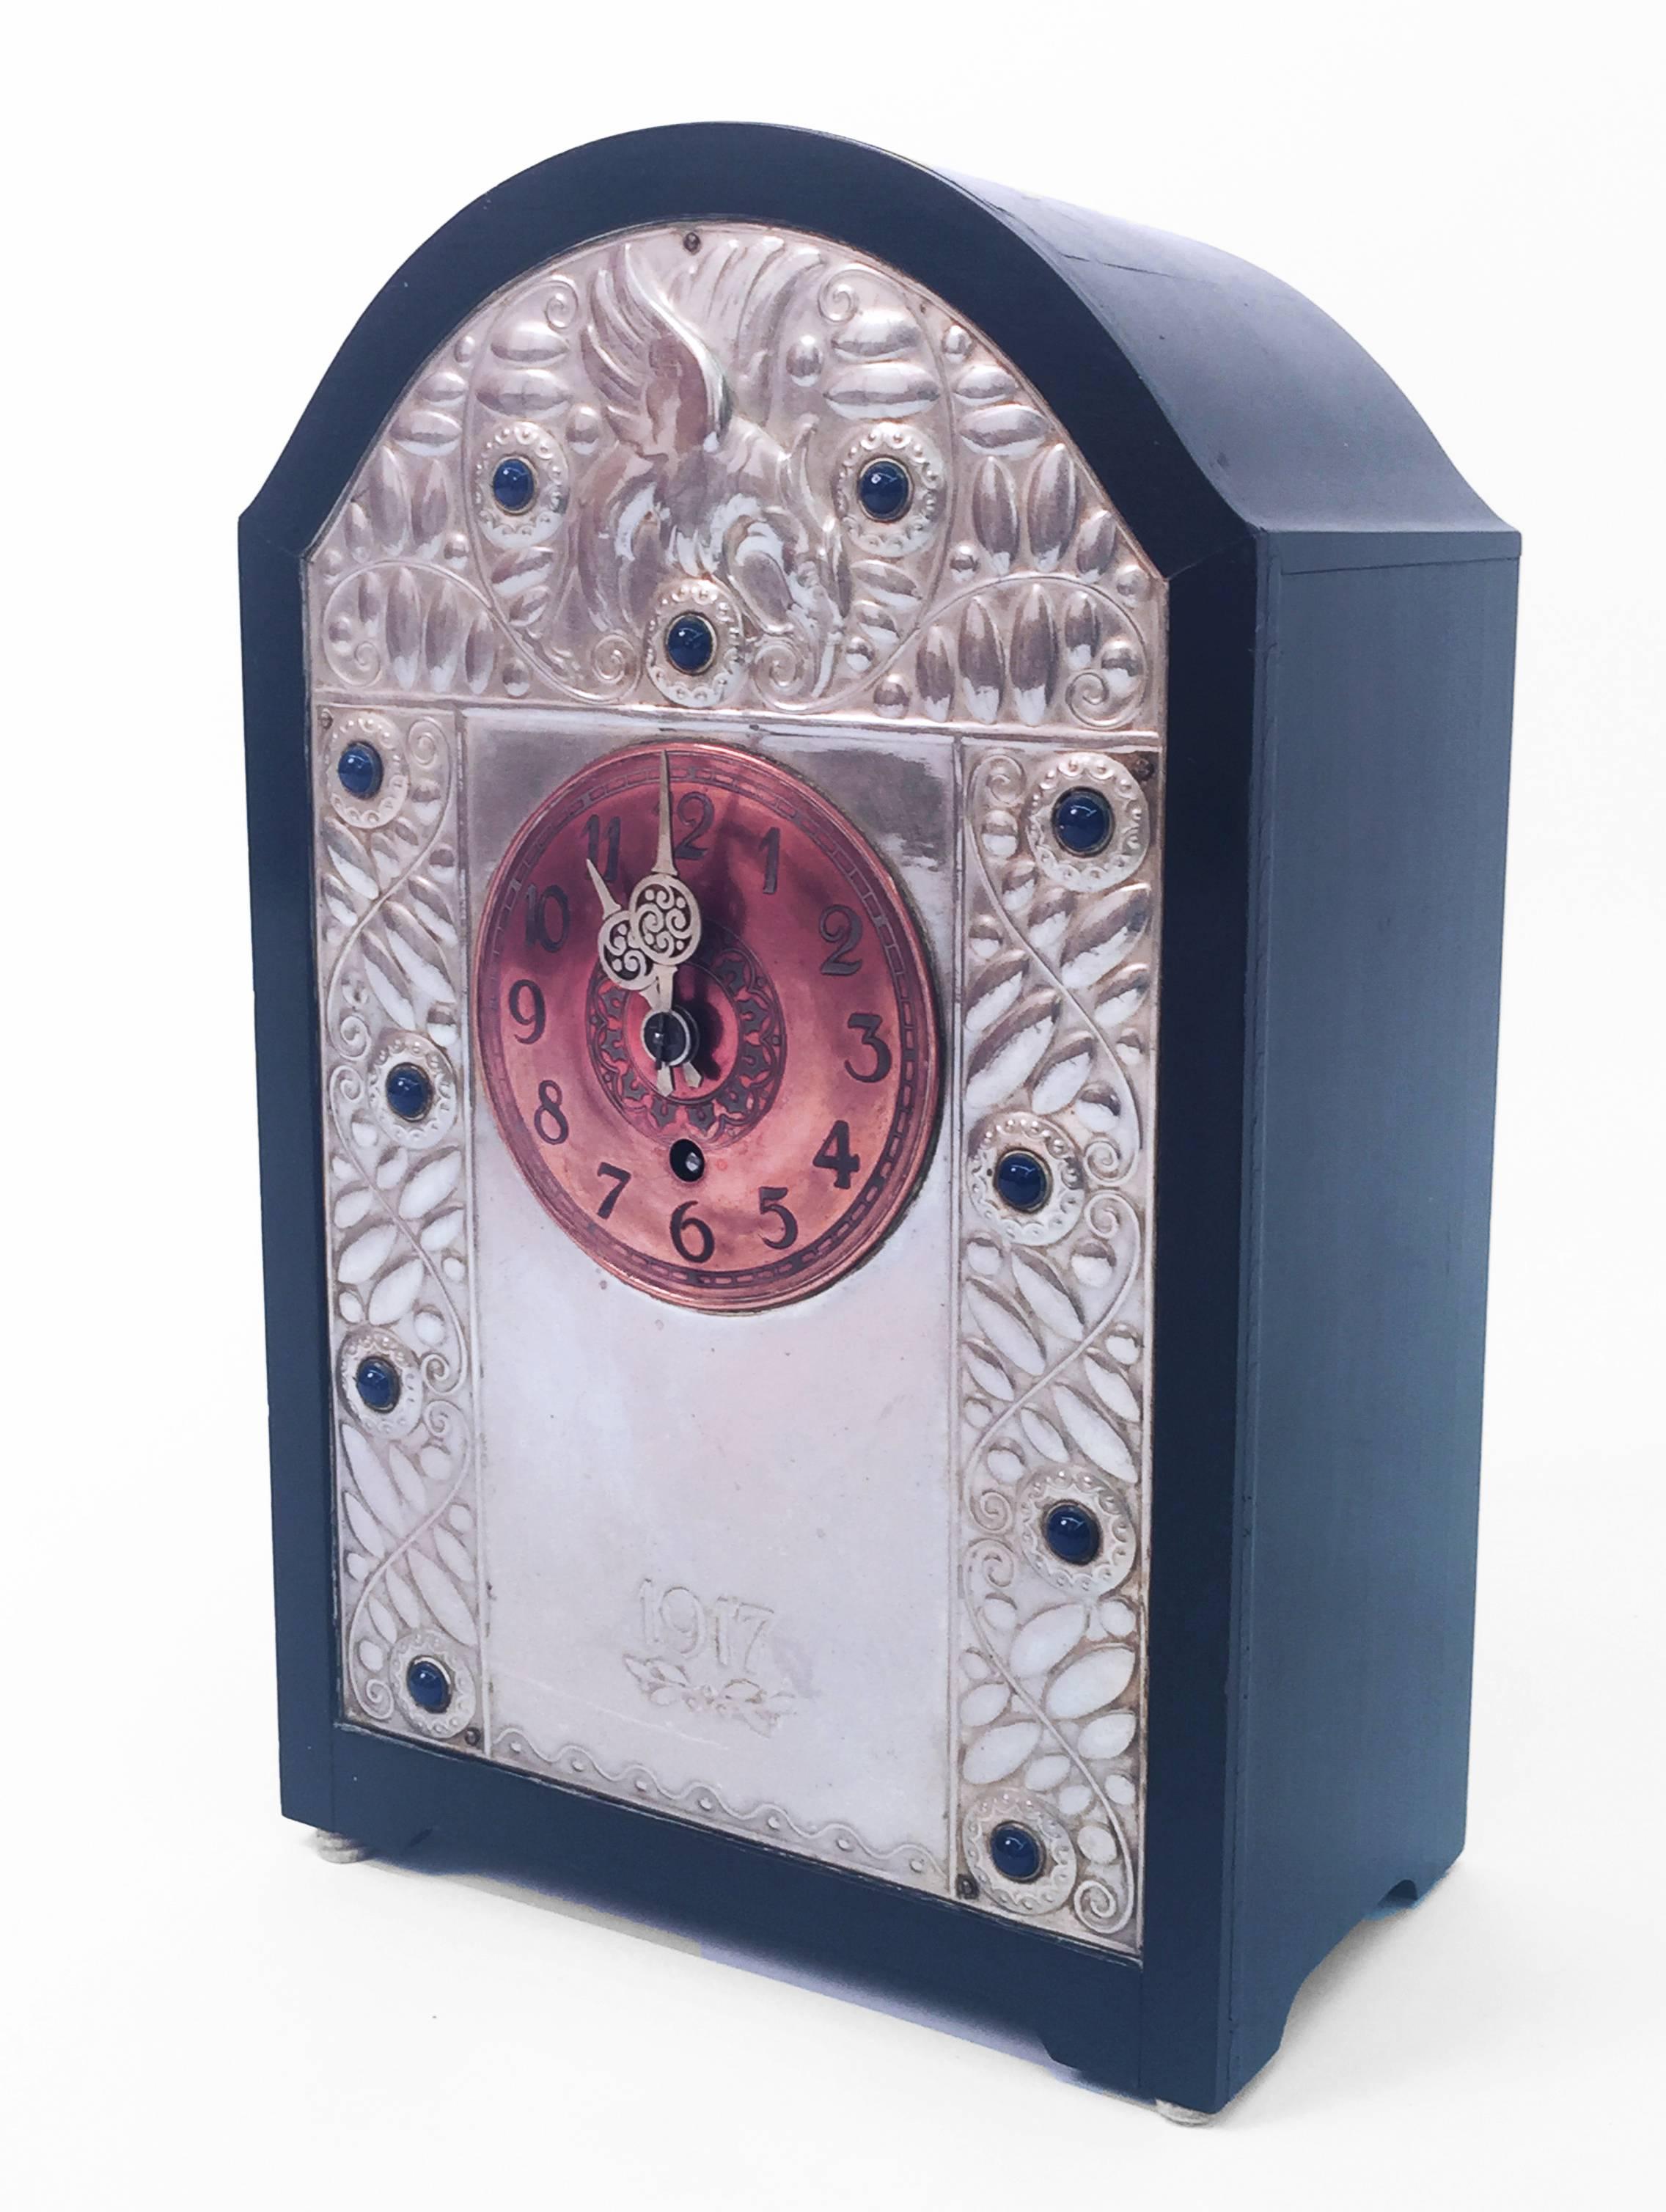 A Secessionist period Viennese mantel clock in the manner of the Weiner Werkstätte having an ebonized case and an exquisitely detailed copper dial mounted on a silver face plate, repousse decorated with leaves, tendrils, an eagle, and dark blue